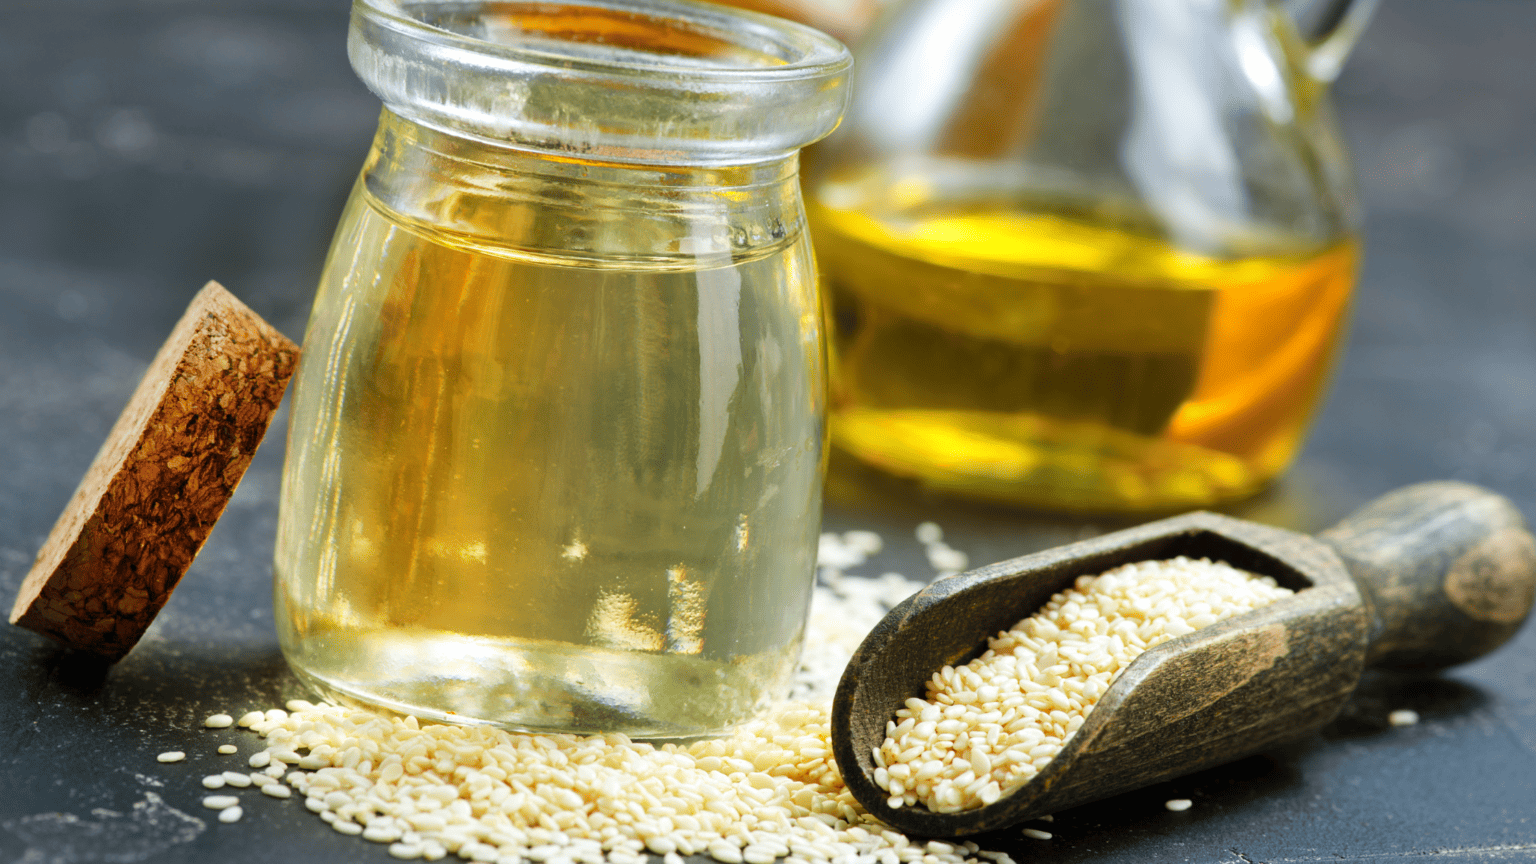 How To Make A Sesame Seed Oil Pulling Recipe! | A Green Beauty Blog